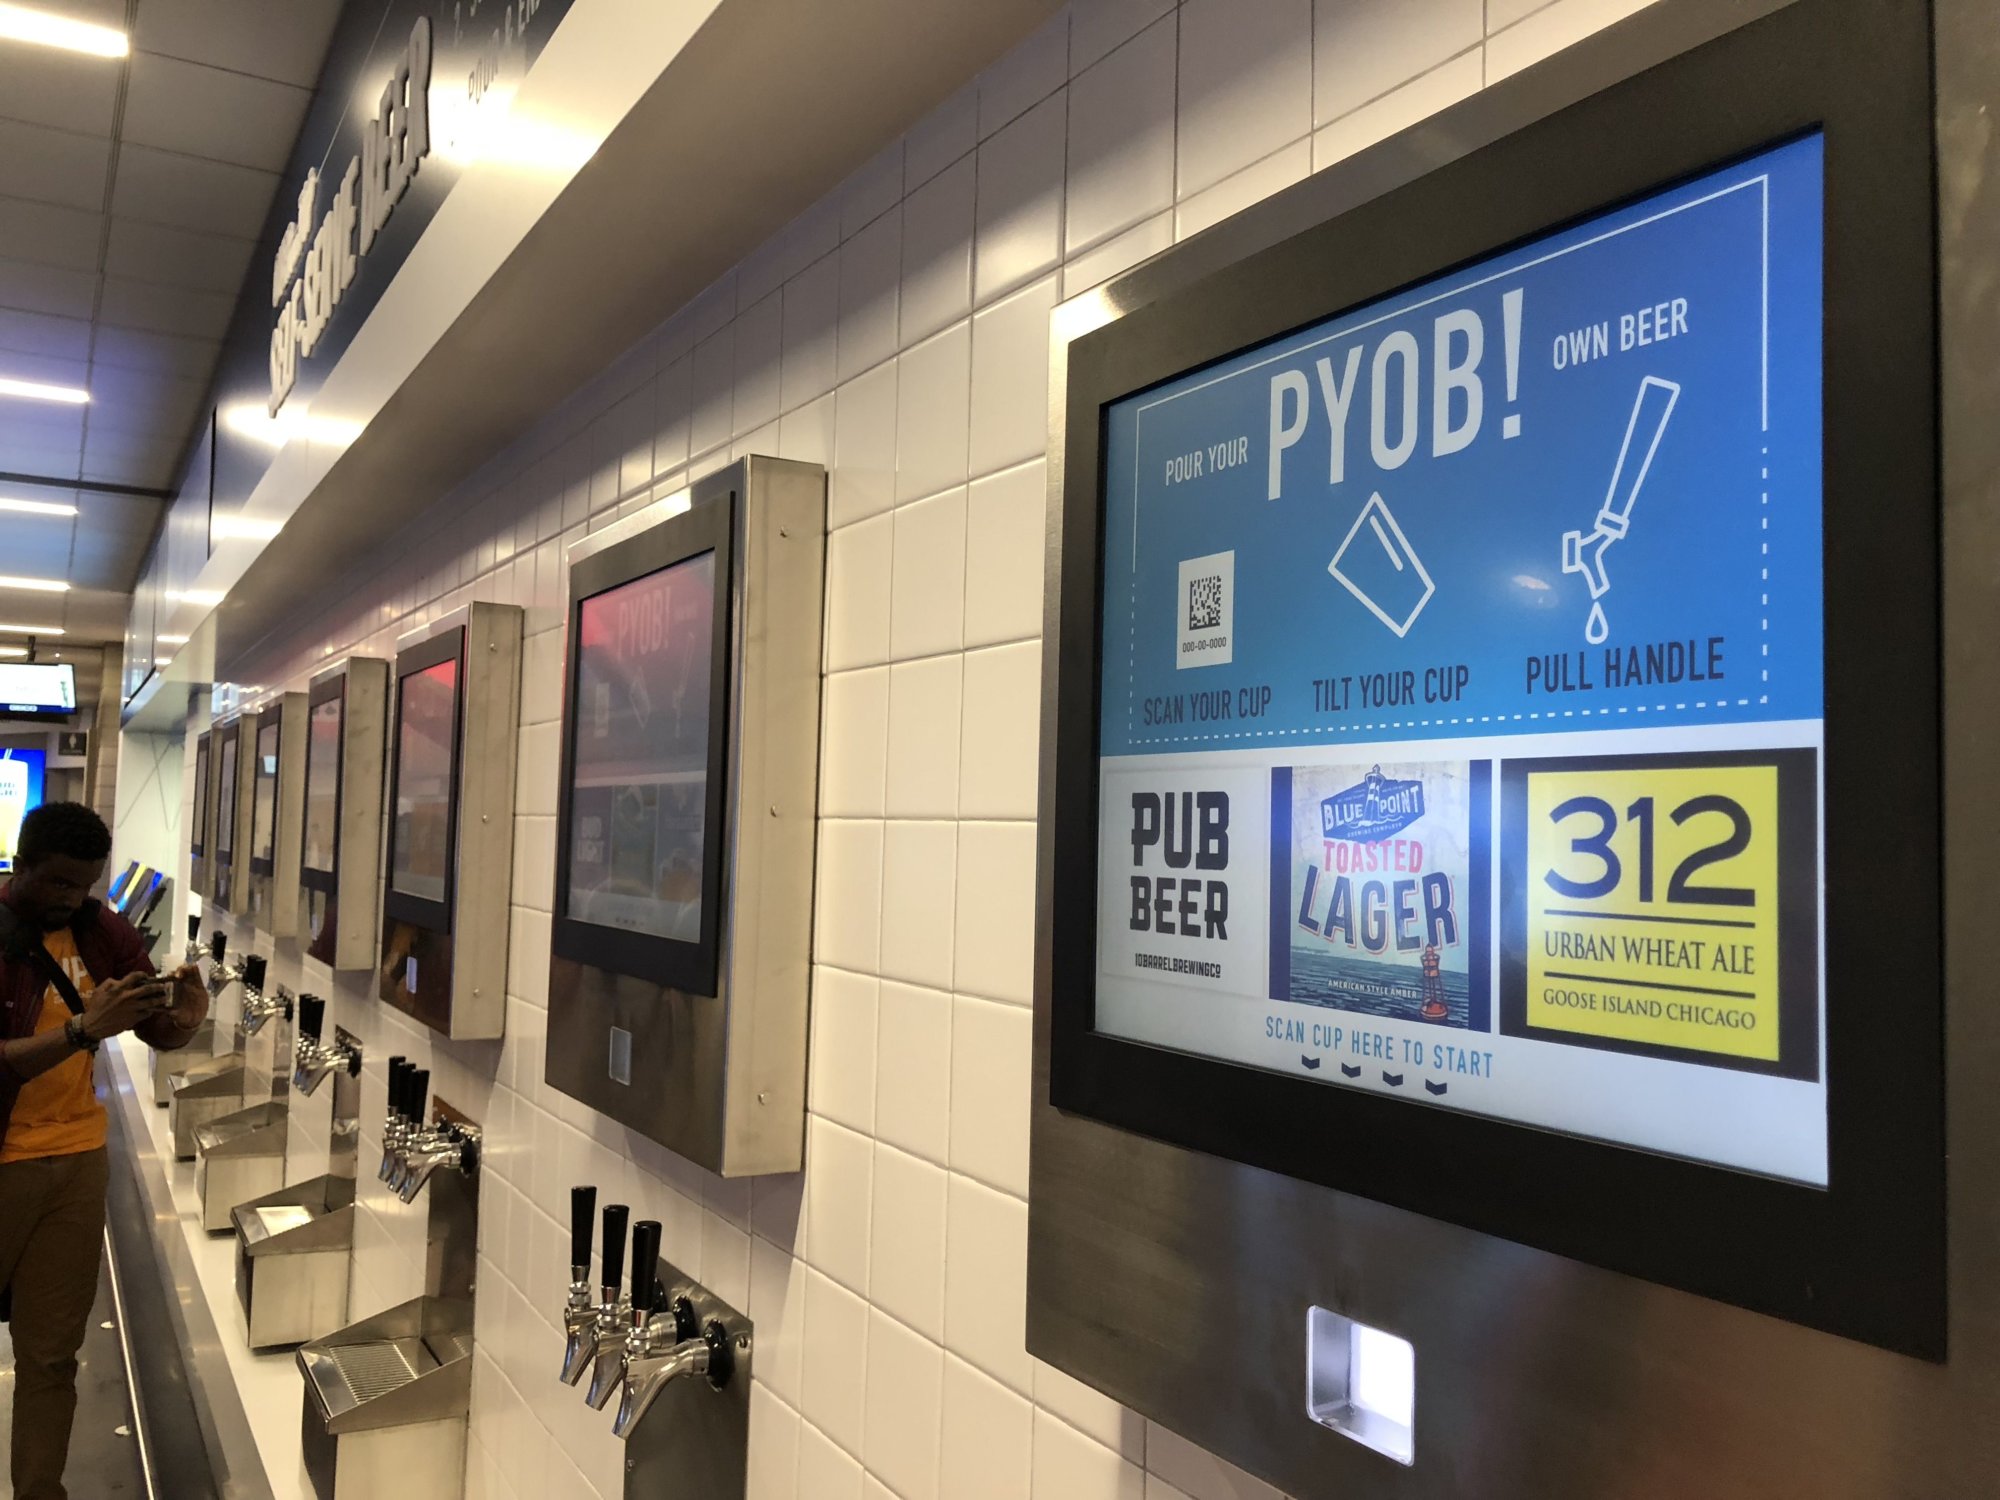 The beer wall near section 417 offers 17 different varieties of self-serve beers. (WTOP/Kristi King)